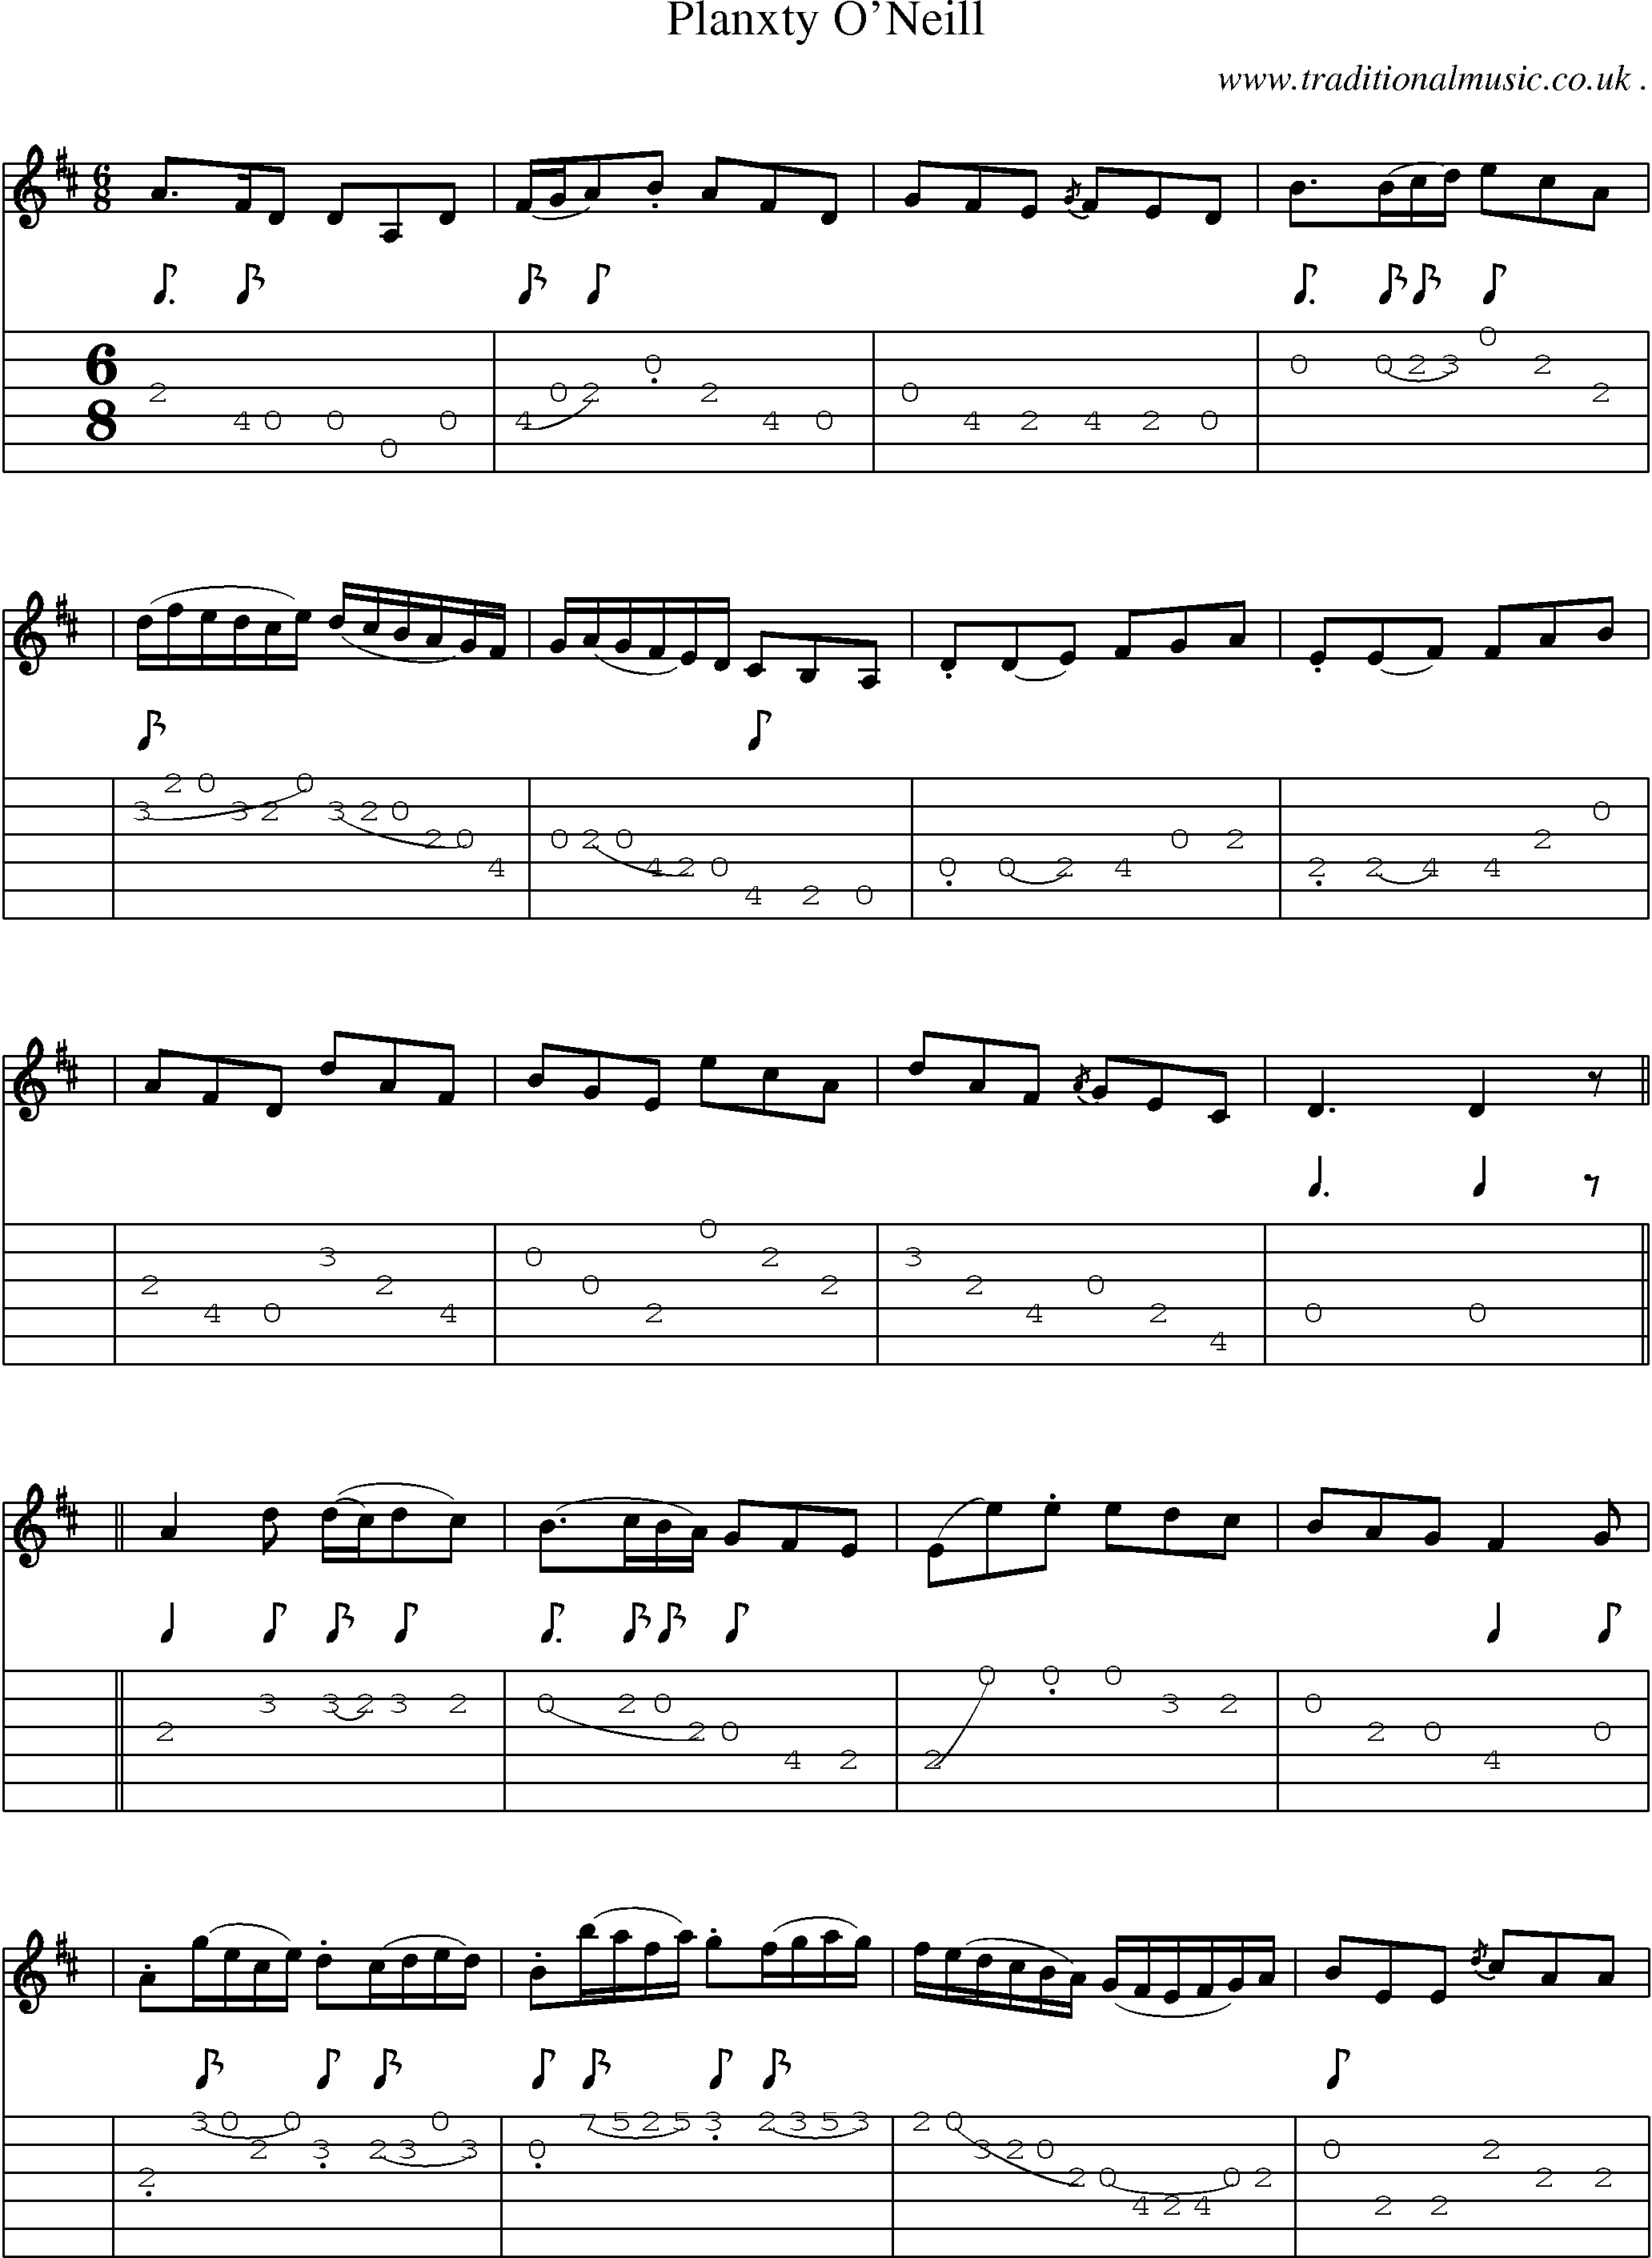 Sheet-music  score, Chords and Guitar Tabs for Planxty Oneill